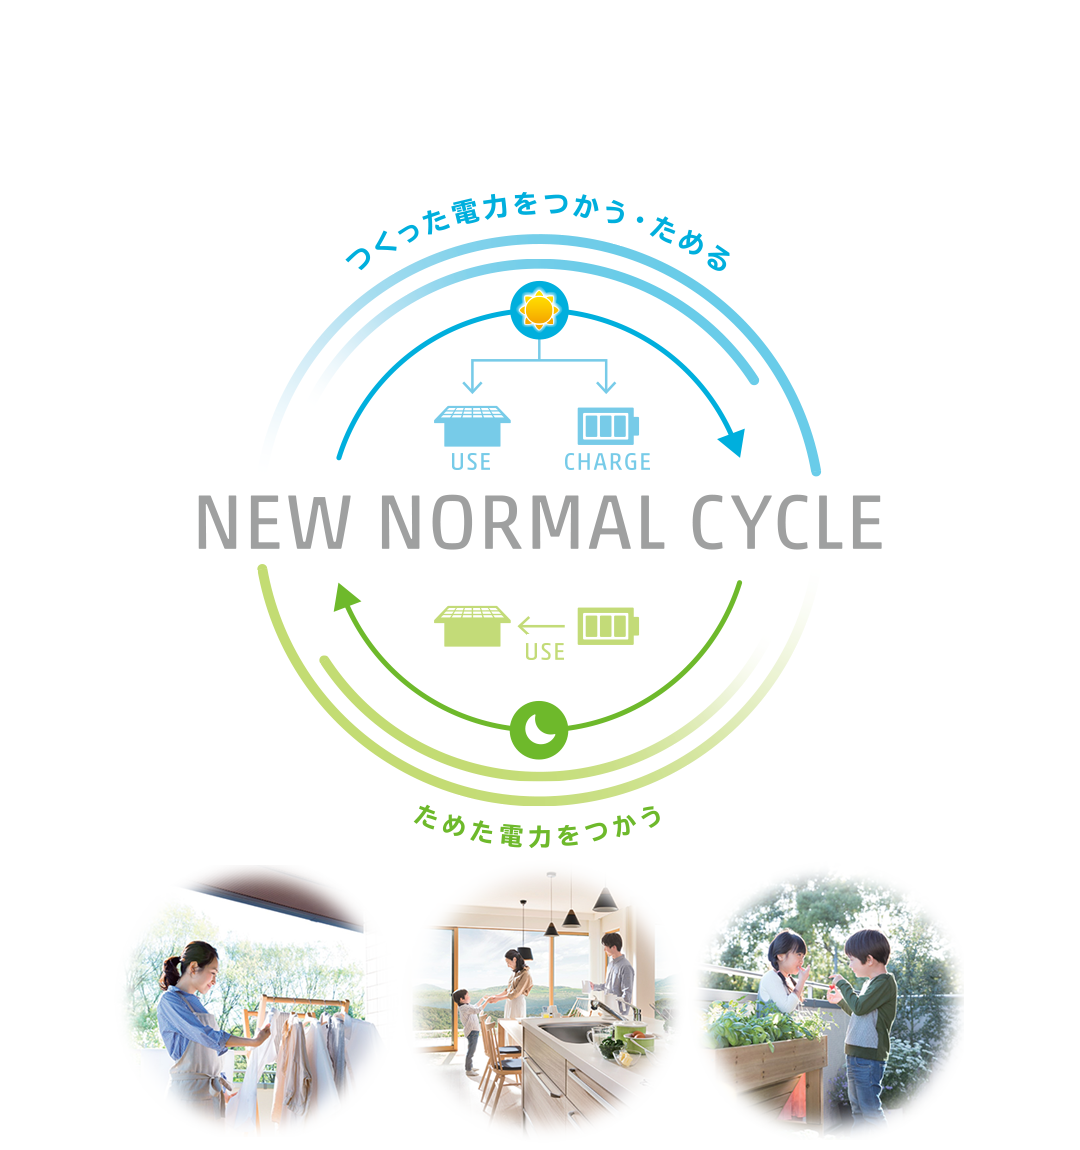 New Normal Cycle